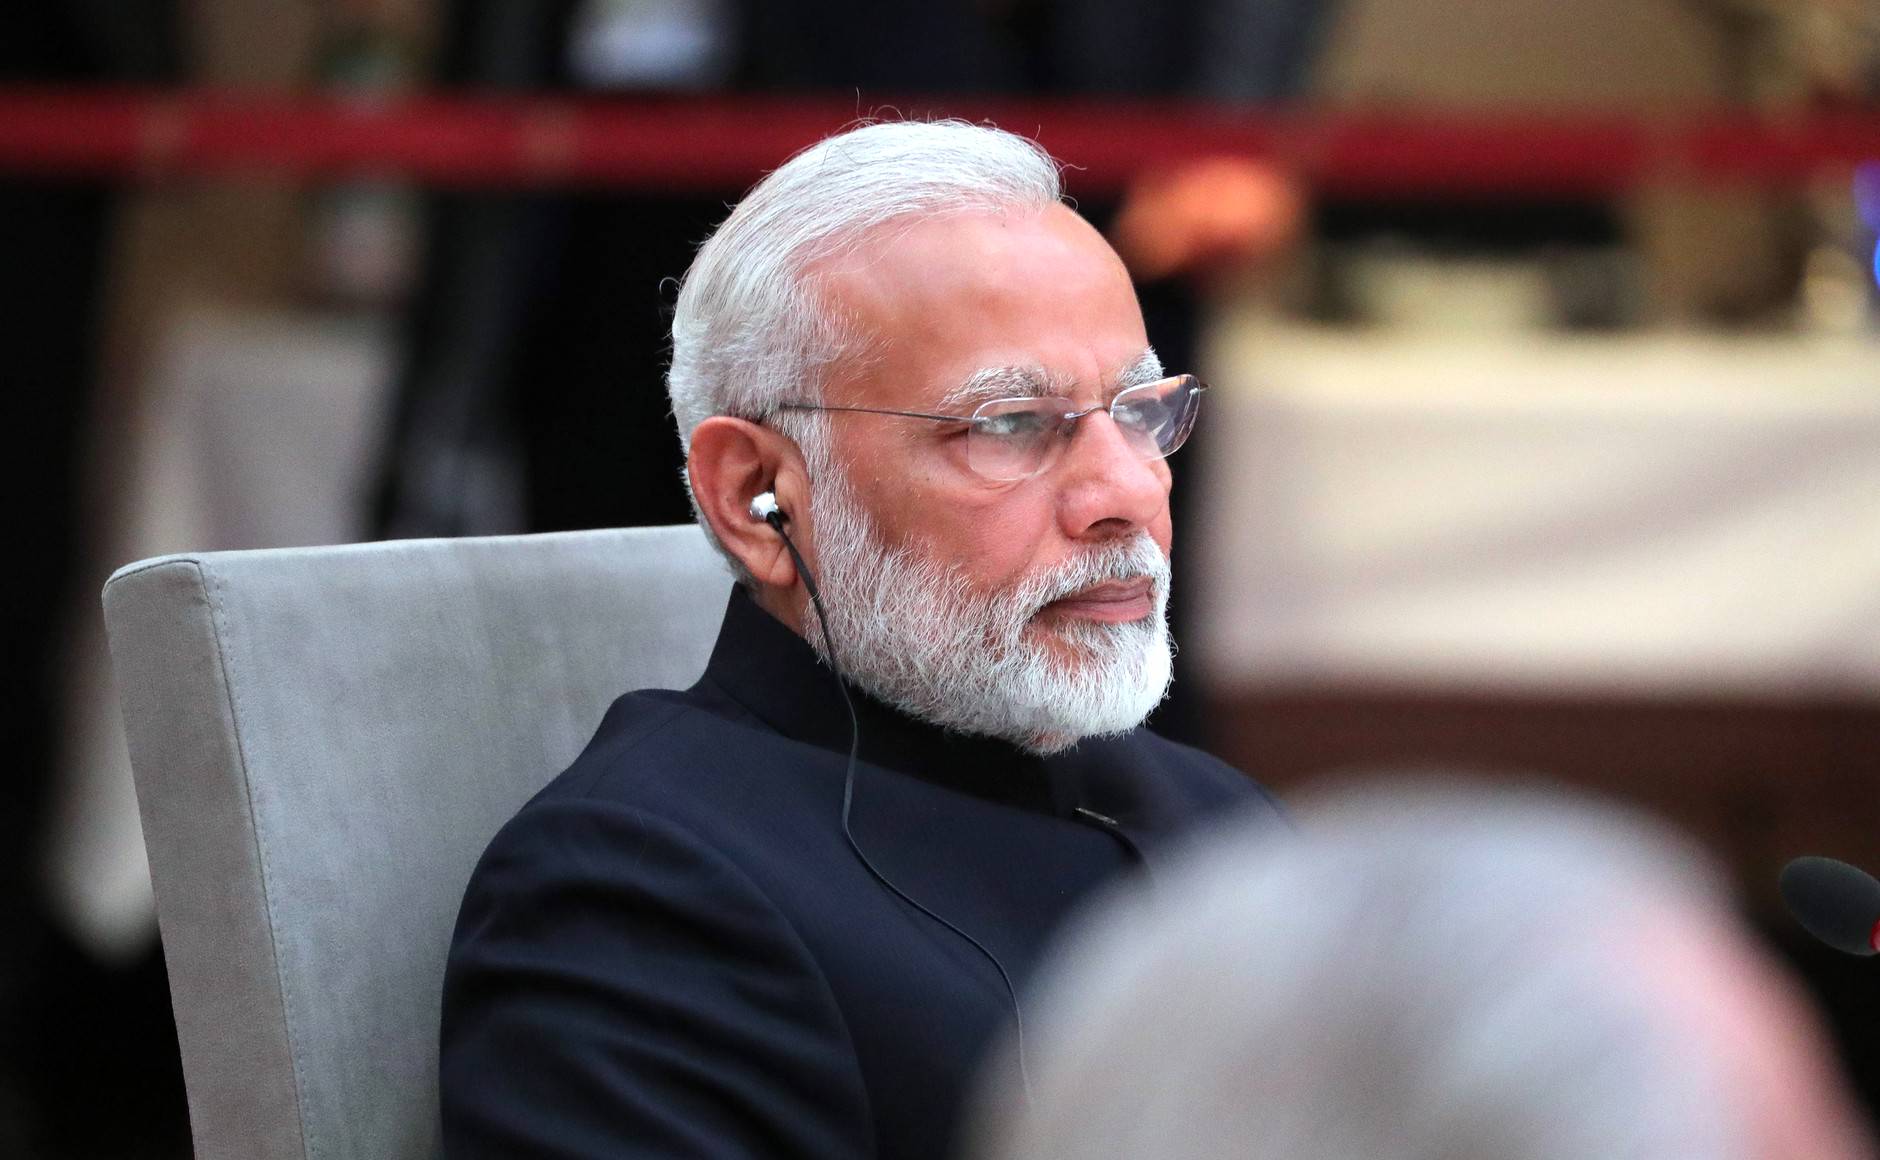 The Prime Minister of India, Modi, is shown sitting.